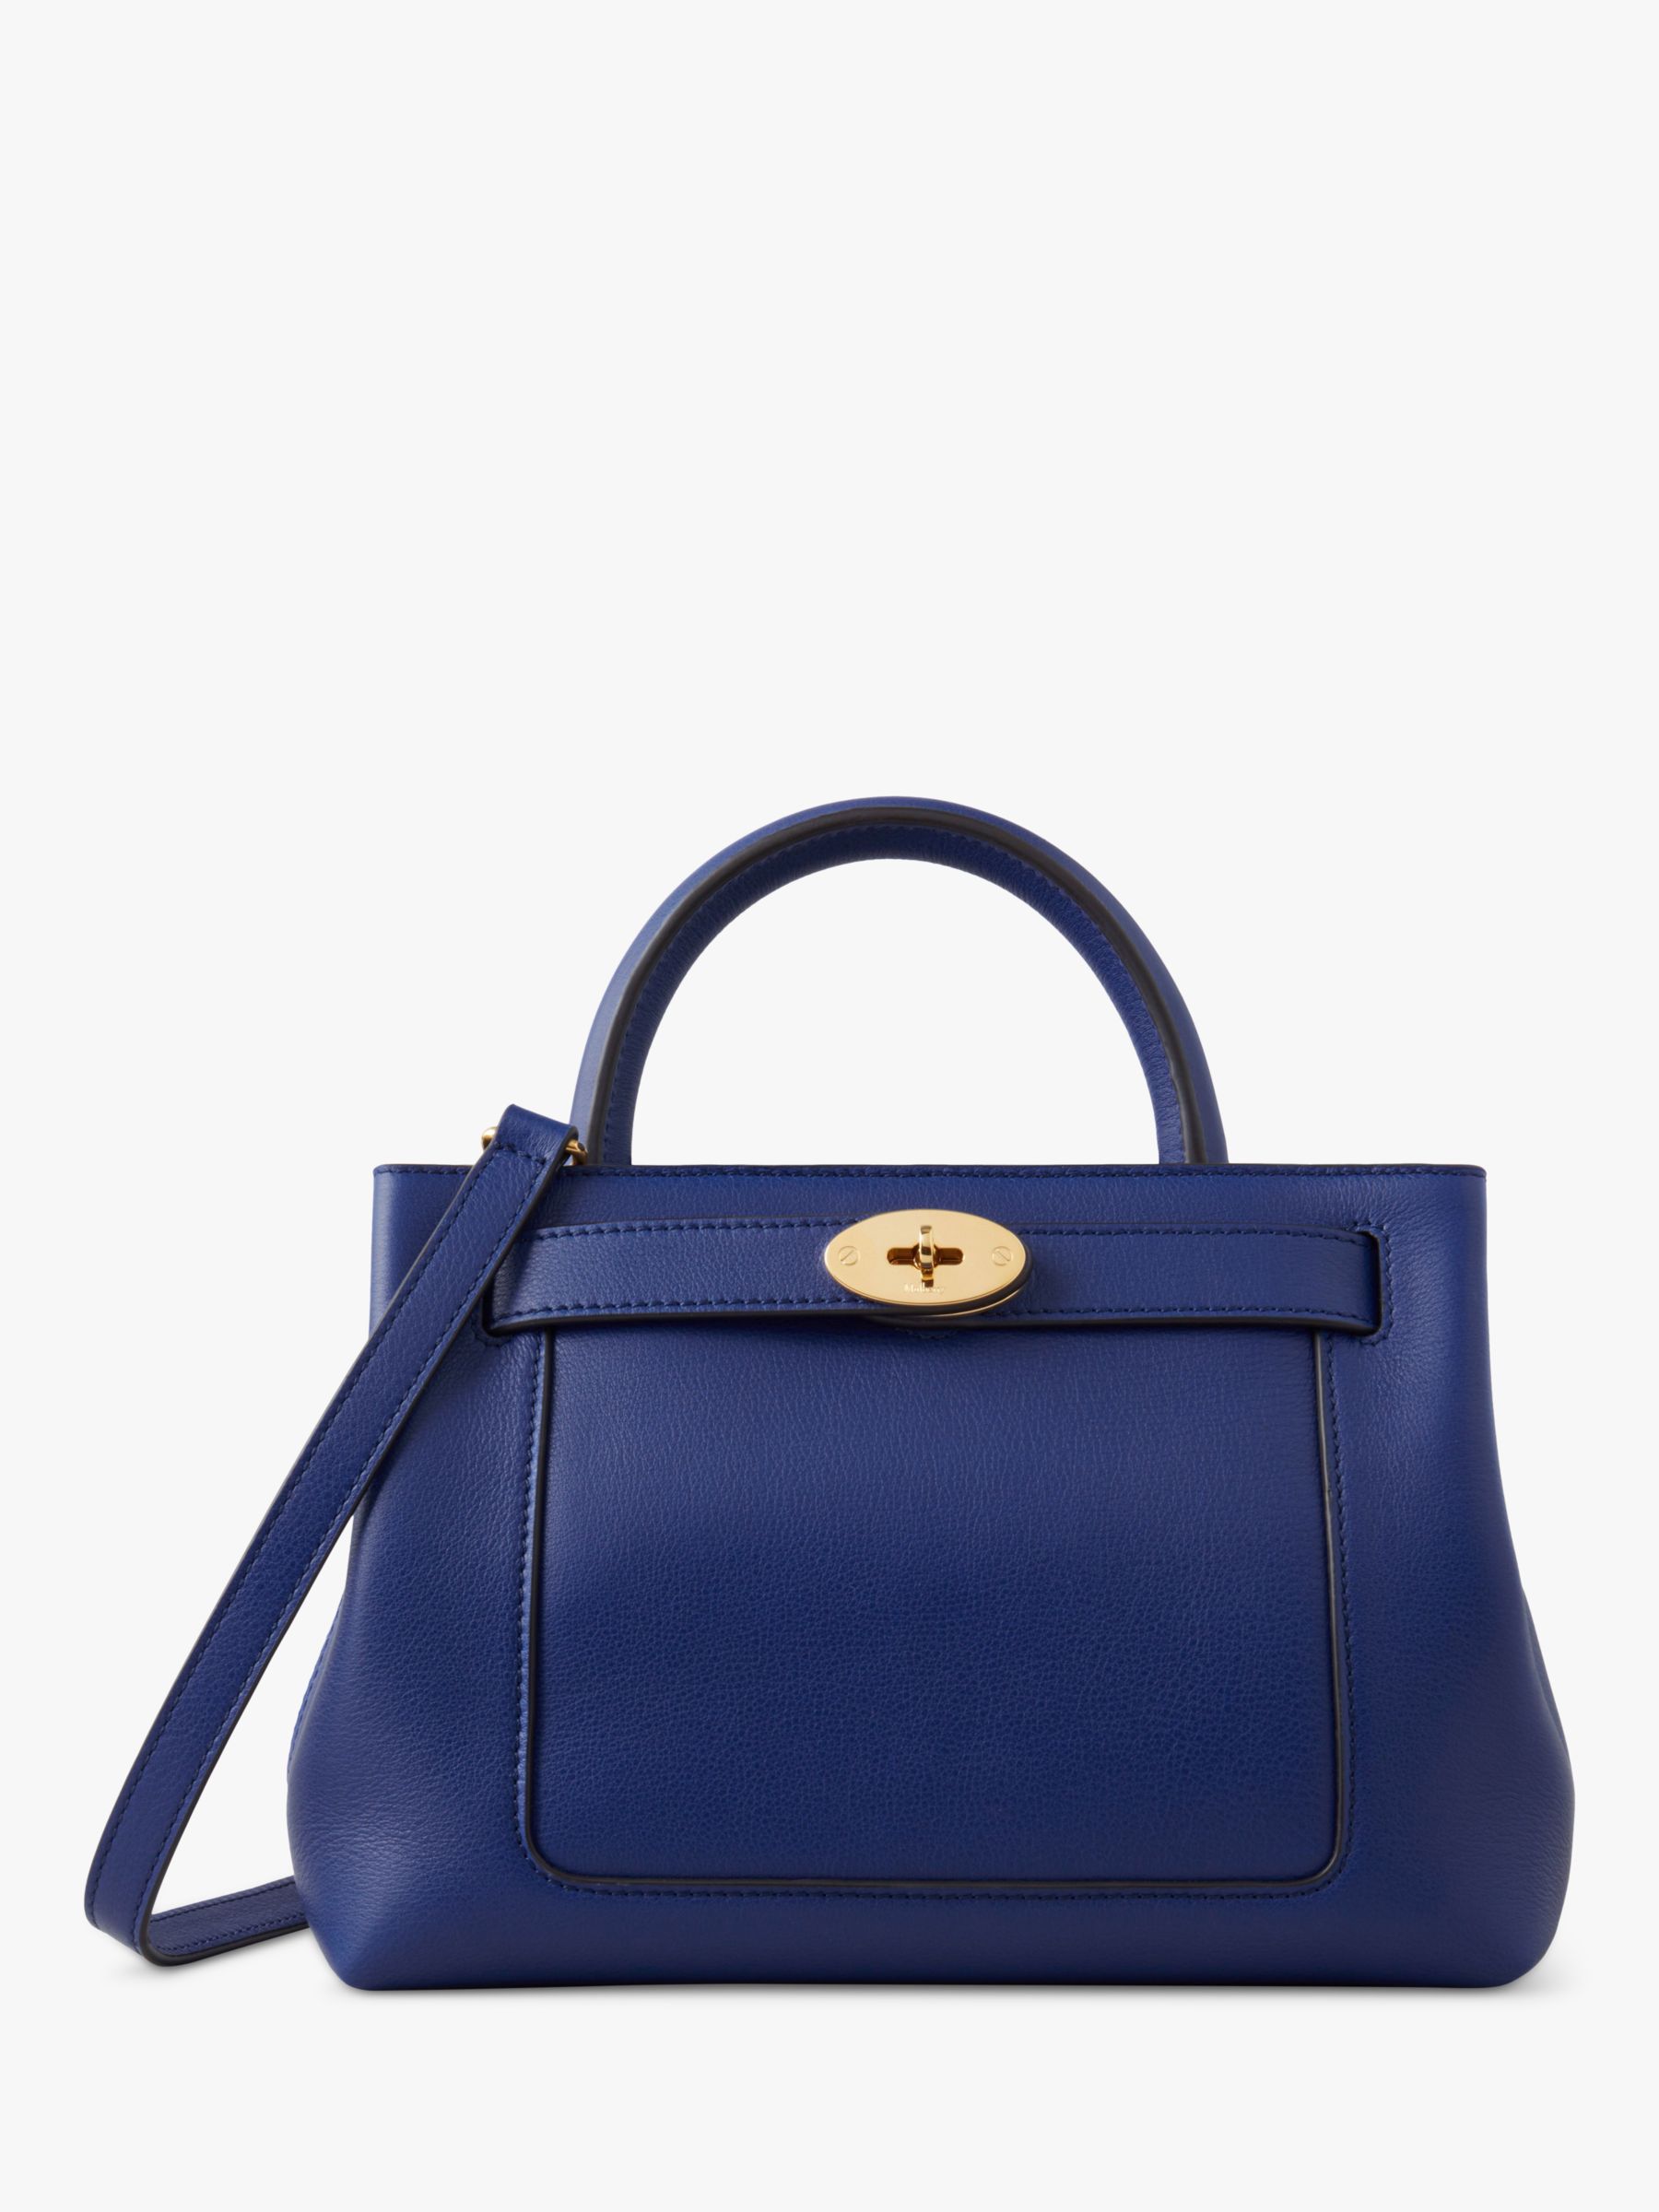 FIVE Reasons Why You Should Invest In The Mulberry Bayswater Bag! Review! -  Fashion For Lunch.